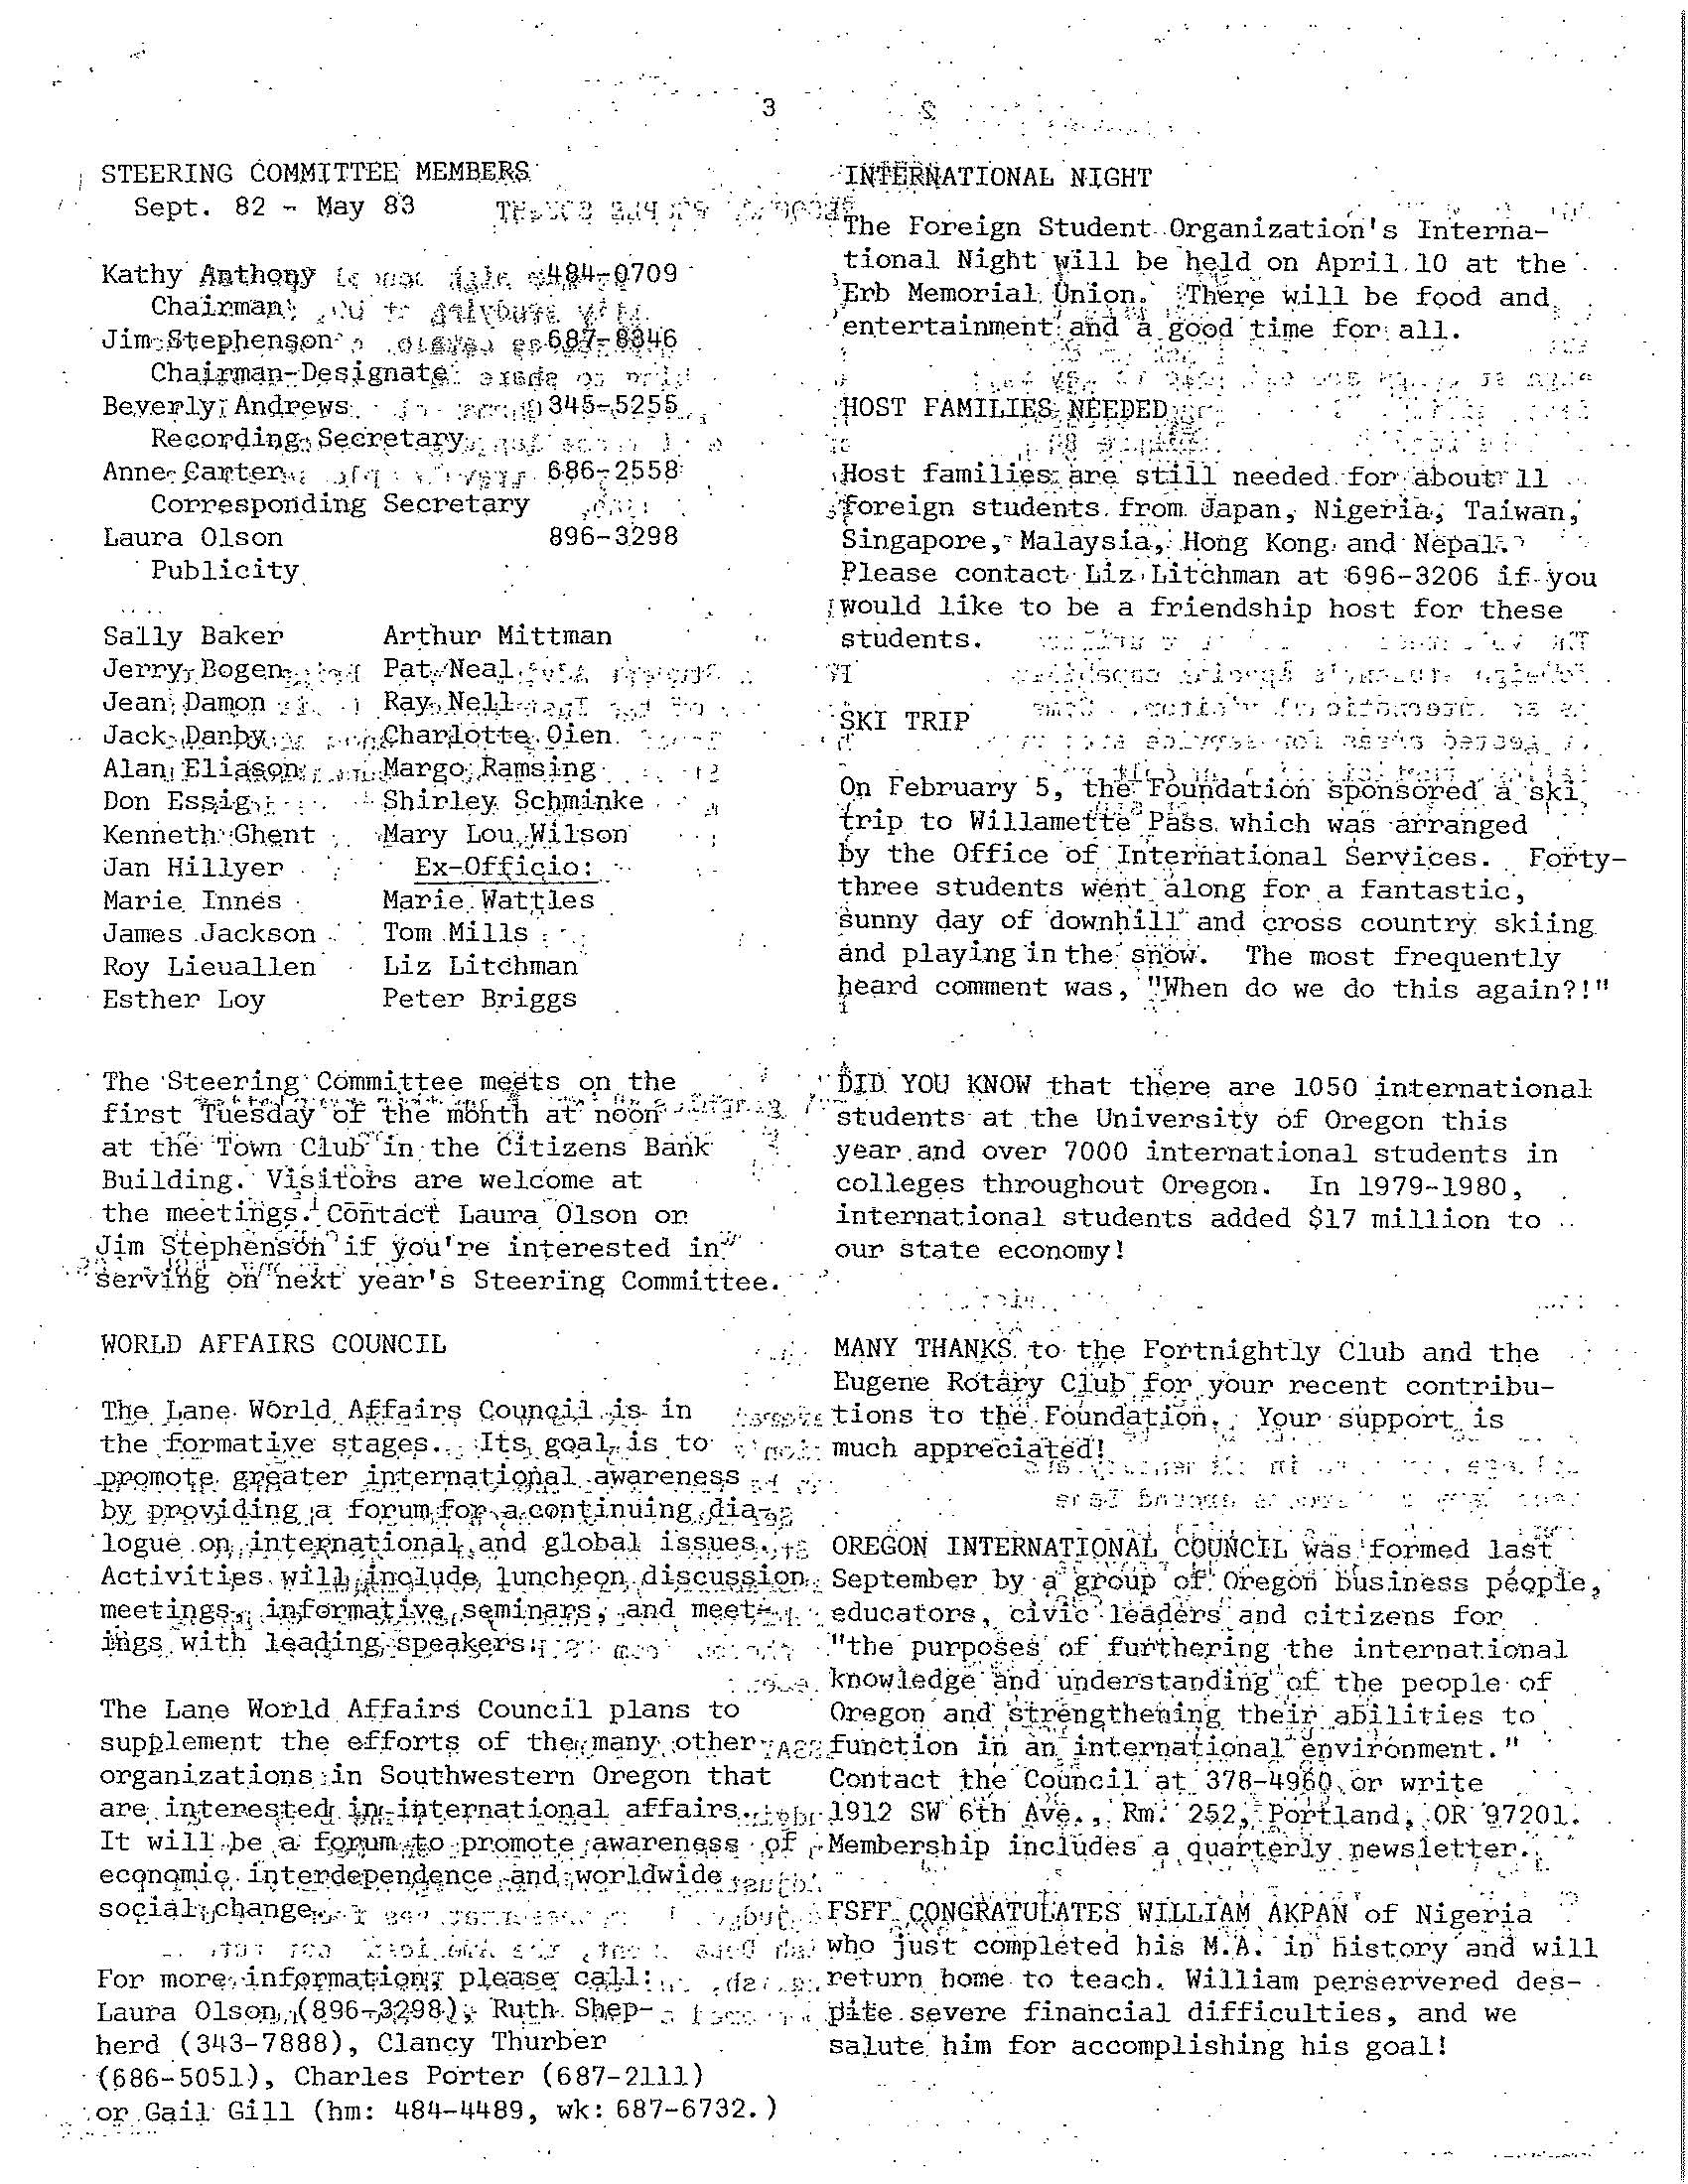 1983 Winter Newsletter, Page_3